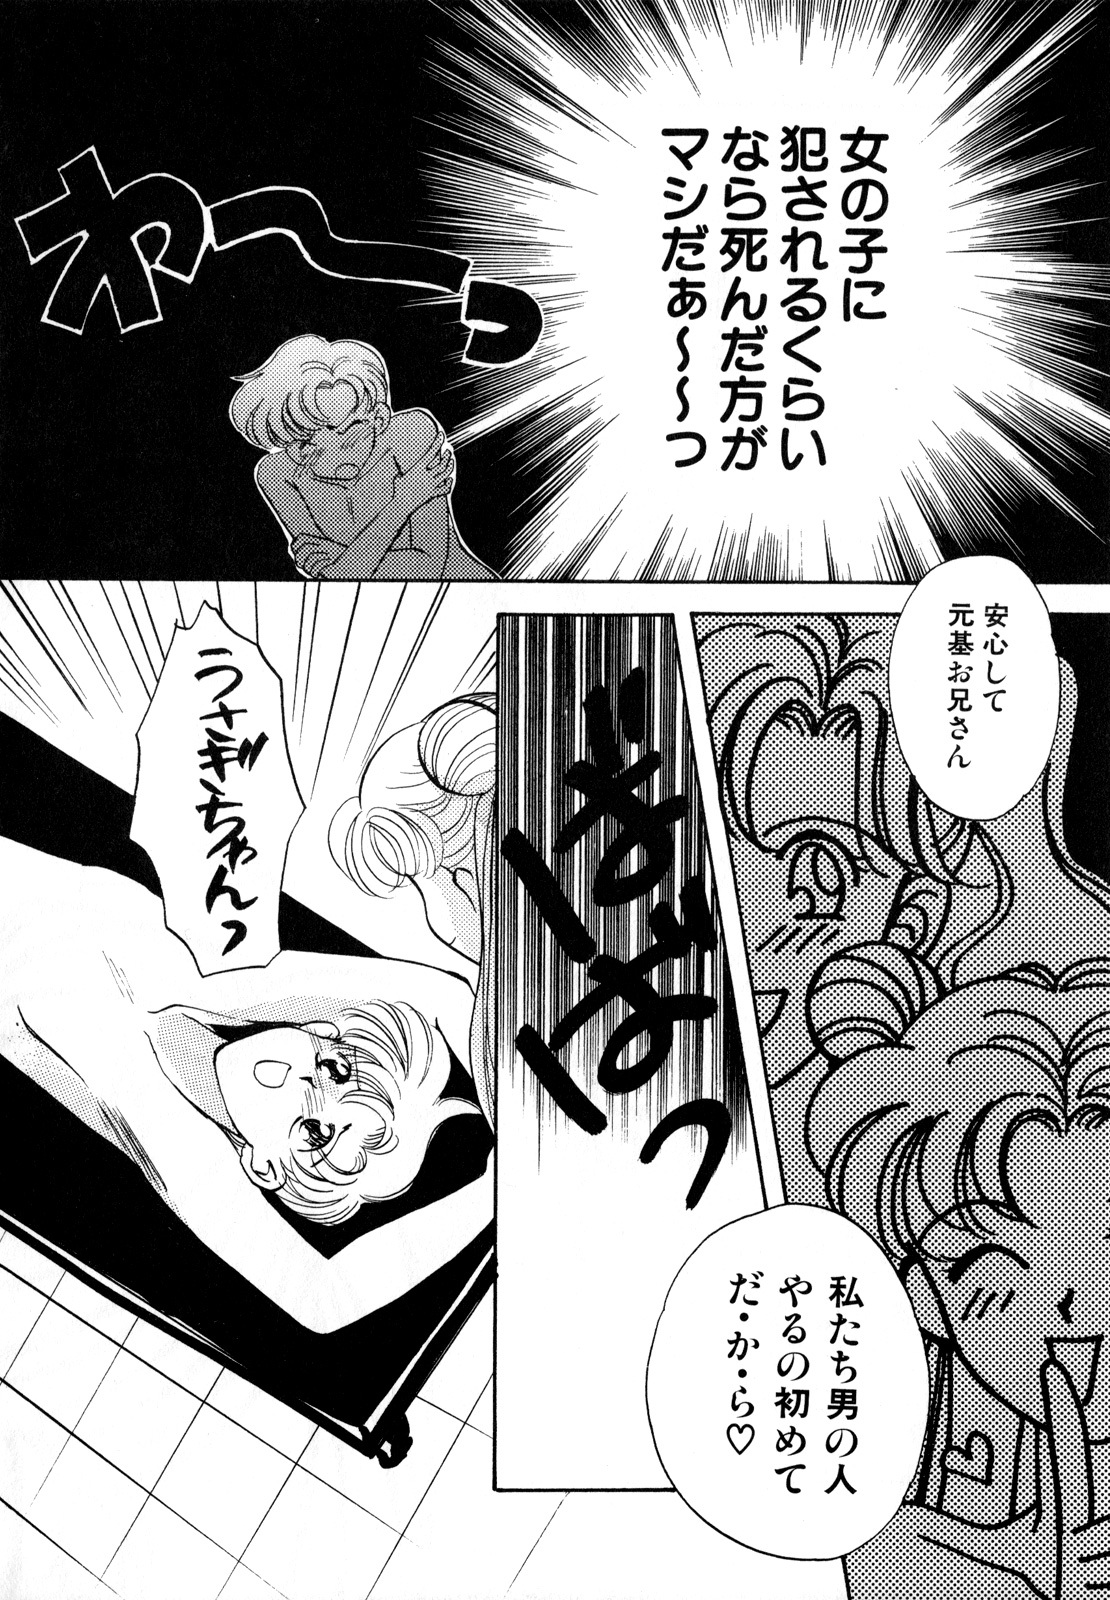 [Anthology] Lunatic Party 2 (Sailor Moon) page 19 full